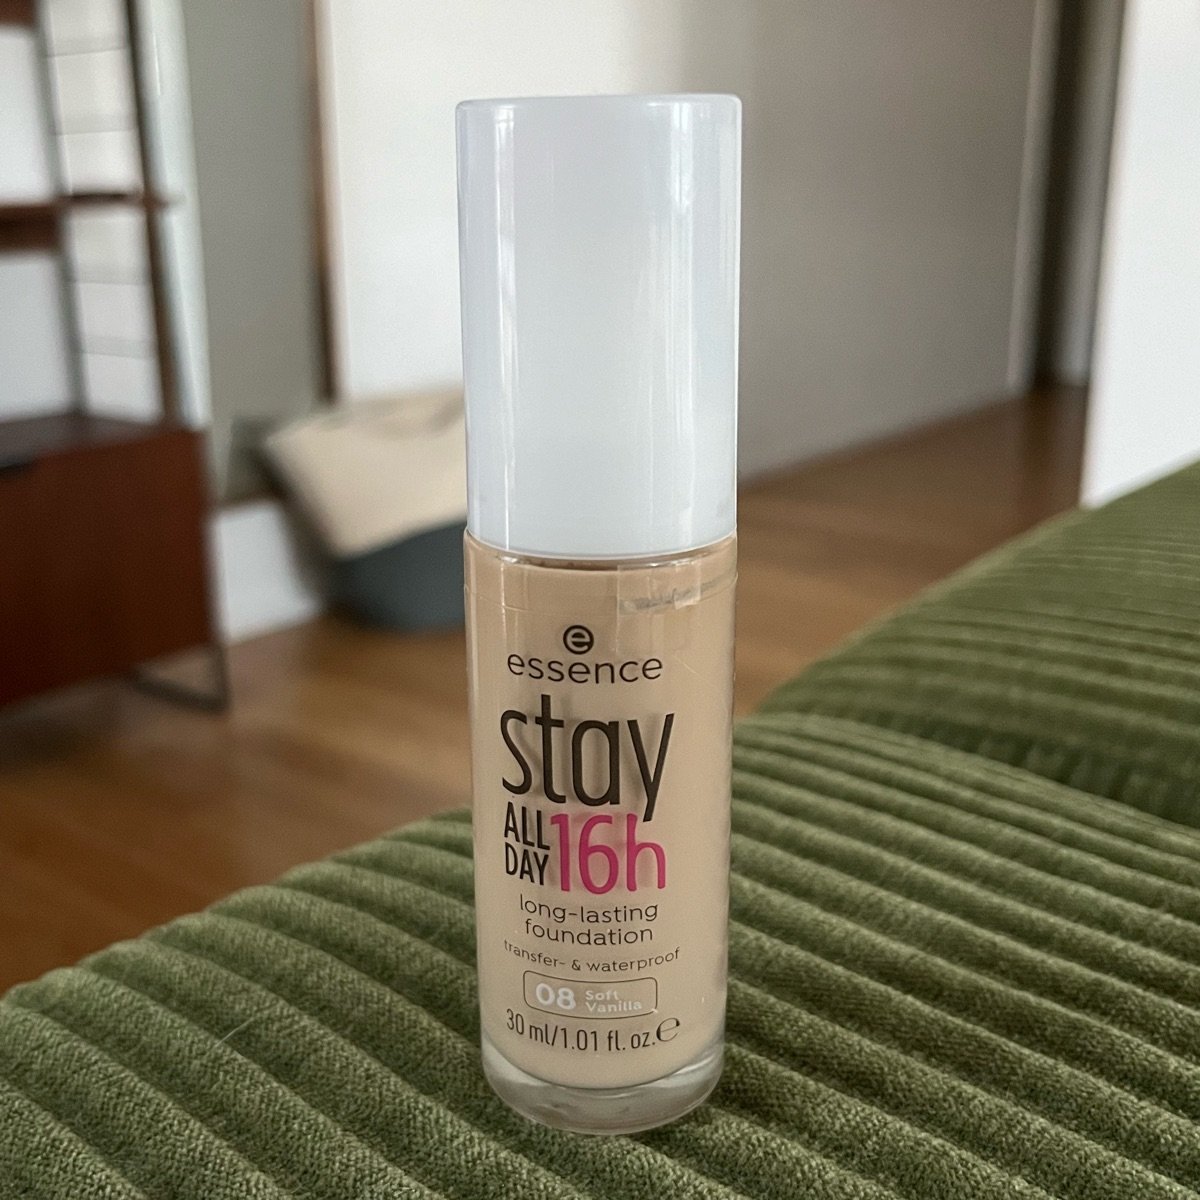 Essence stay all day 16h long-lasting foundation 08 soft vanilla Reviews |  abillion